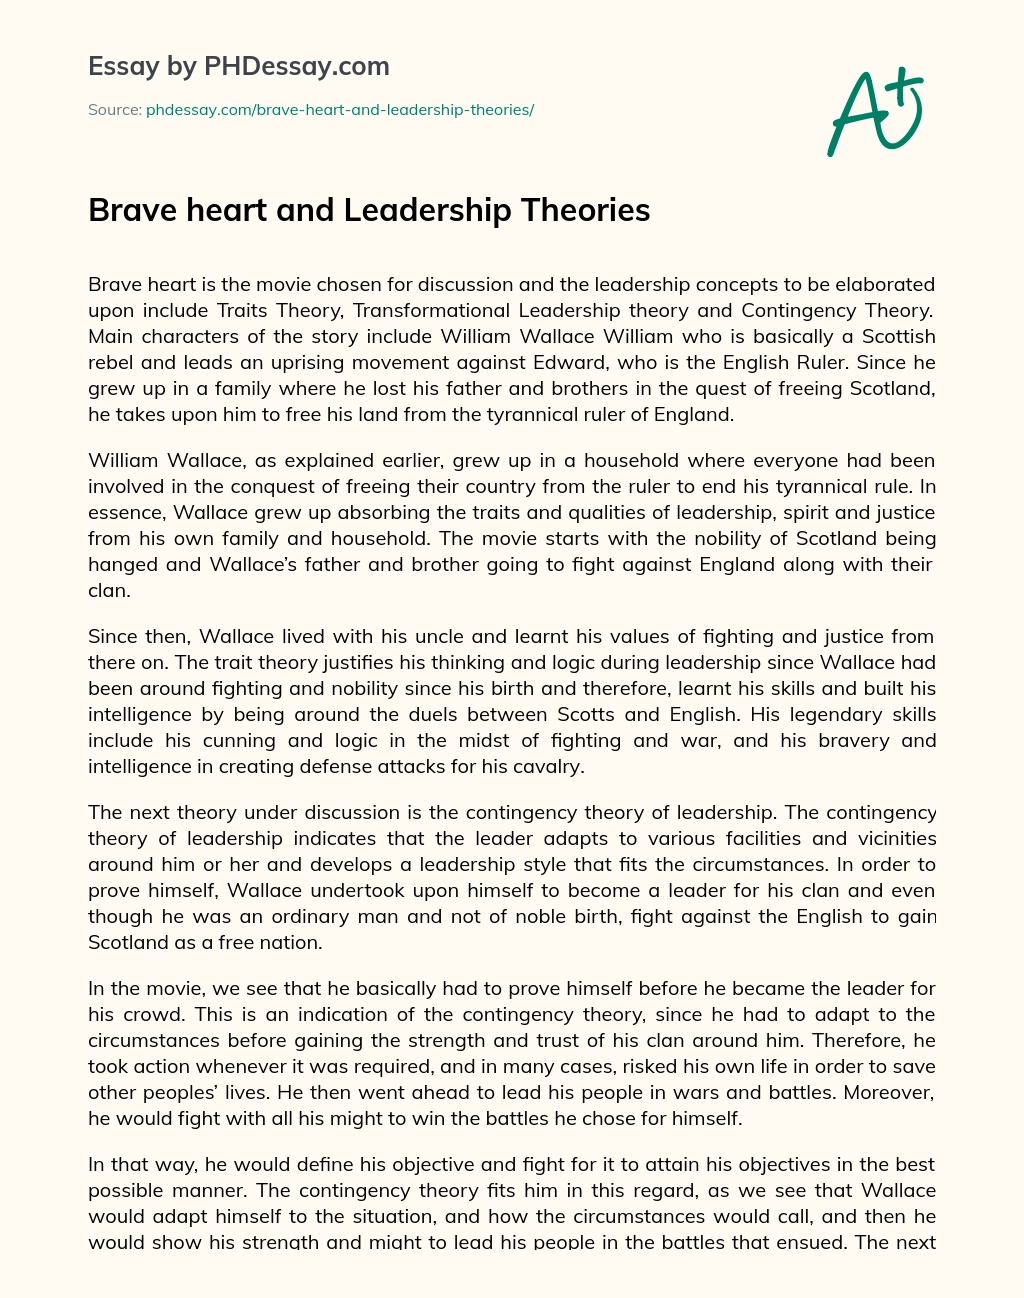 Brave heart and Leadership Theories essay